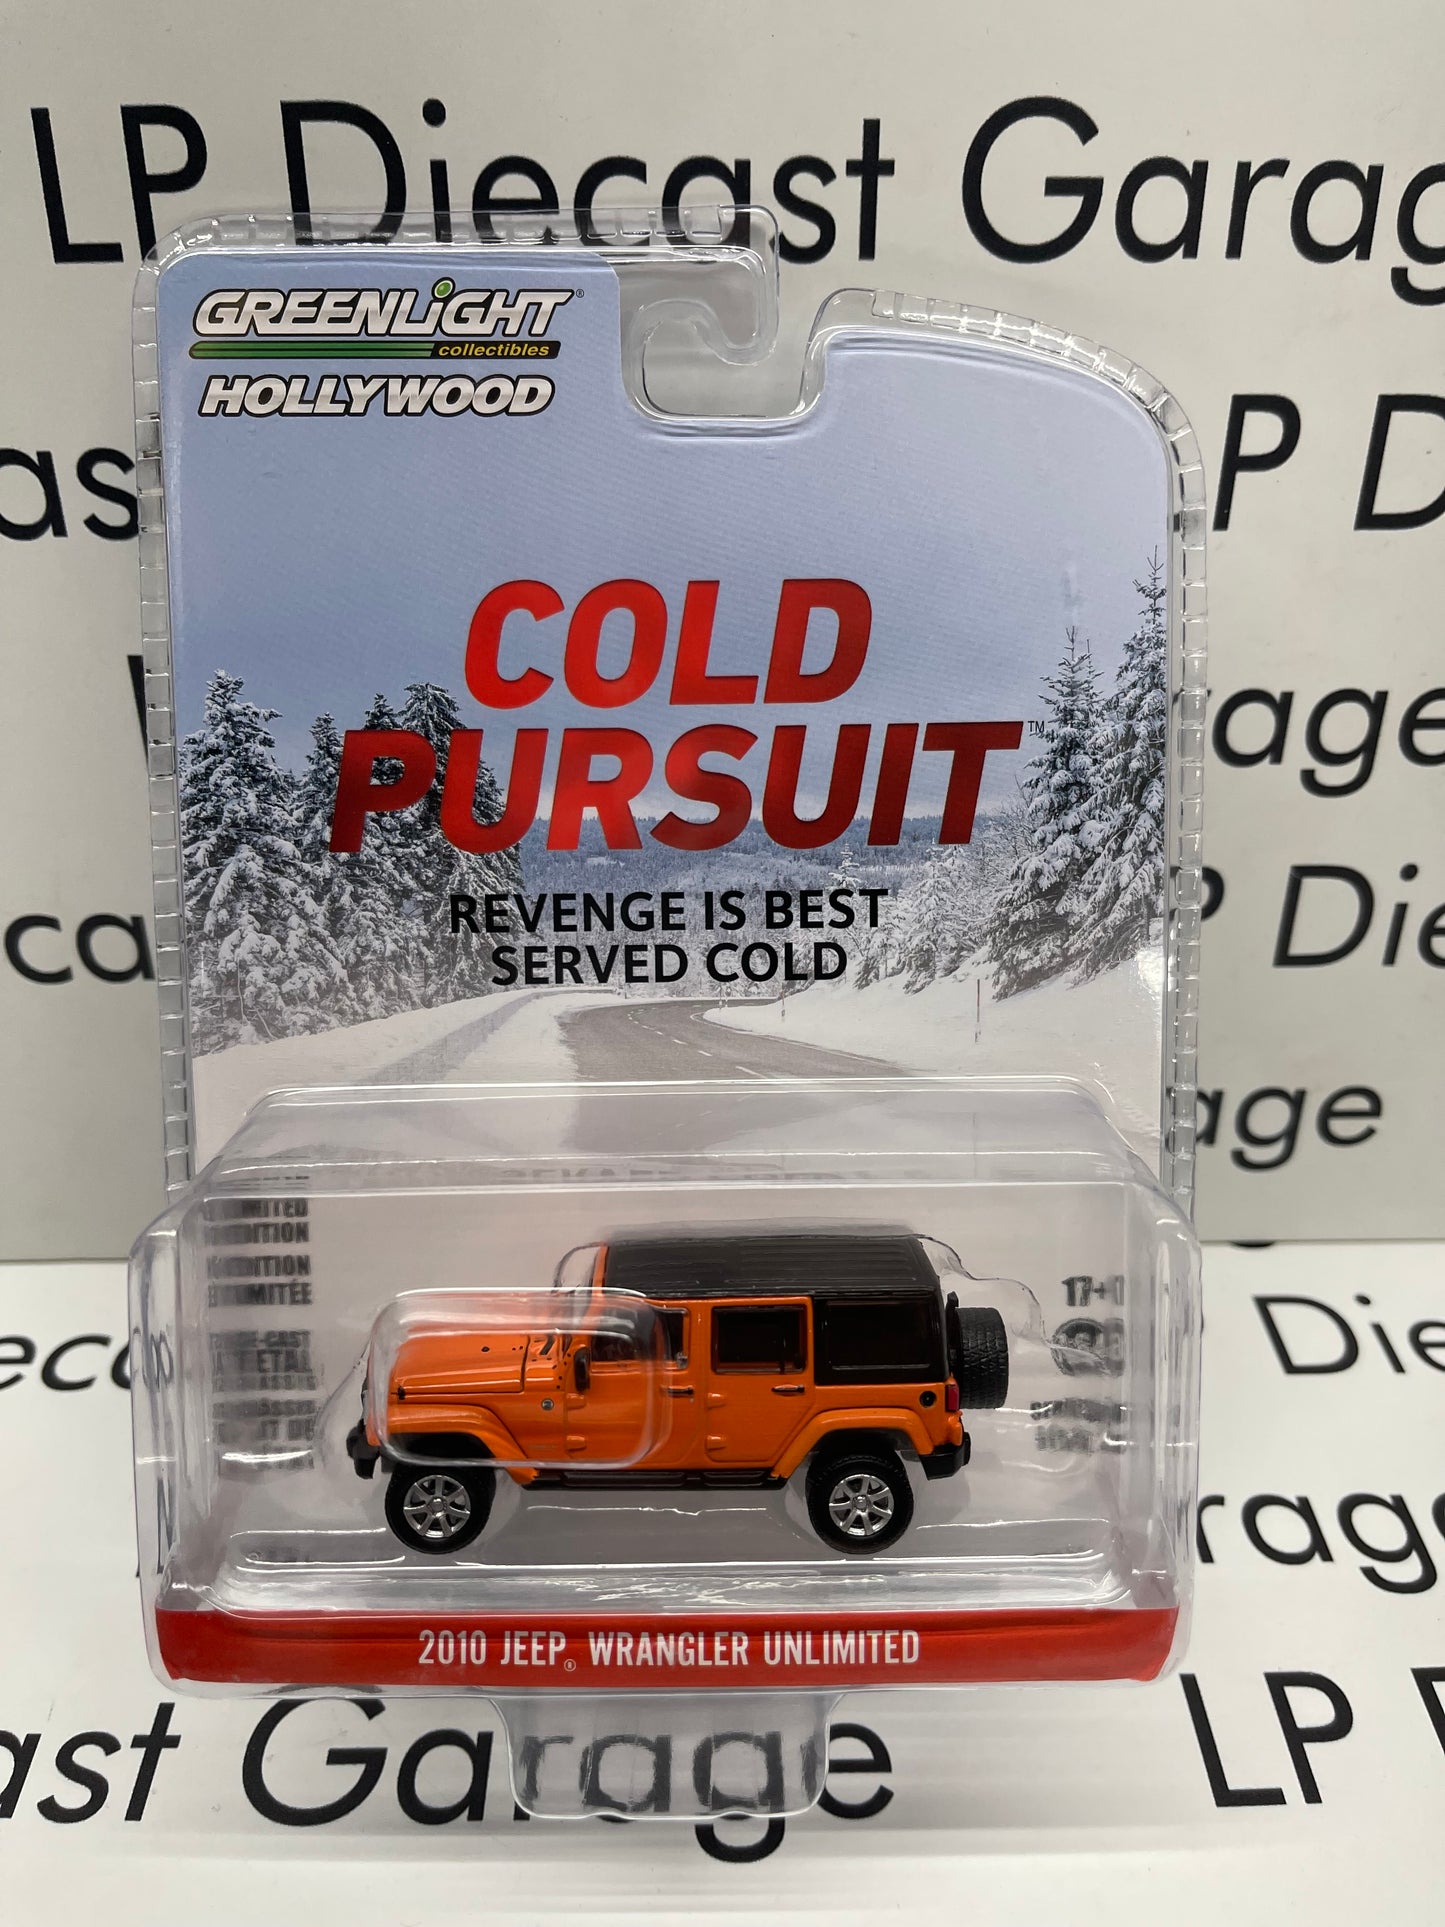 GREENLIGHT 2010 Jeep Wrangler Unlimited Orange Cold Pursuit Hollywood 1:64 Diecast